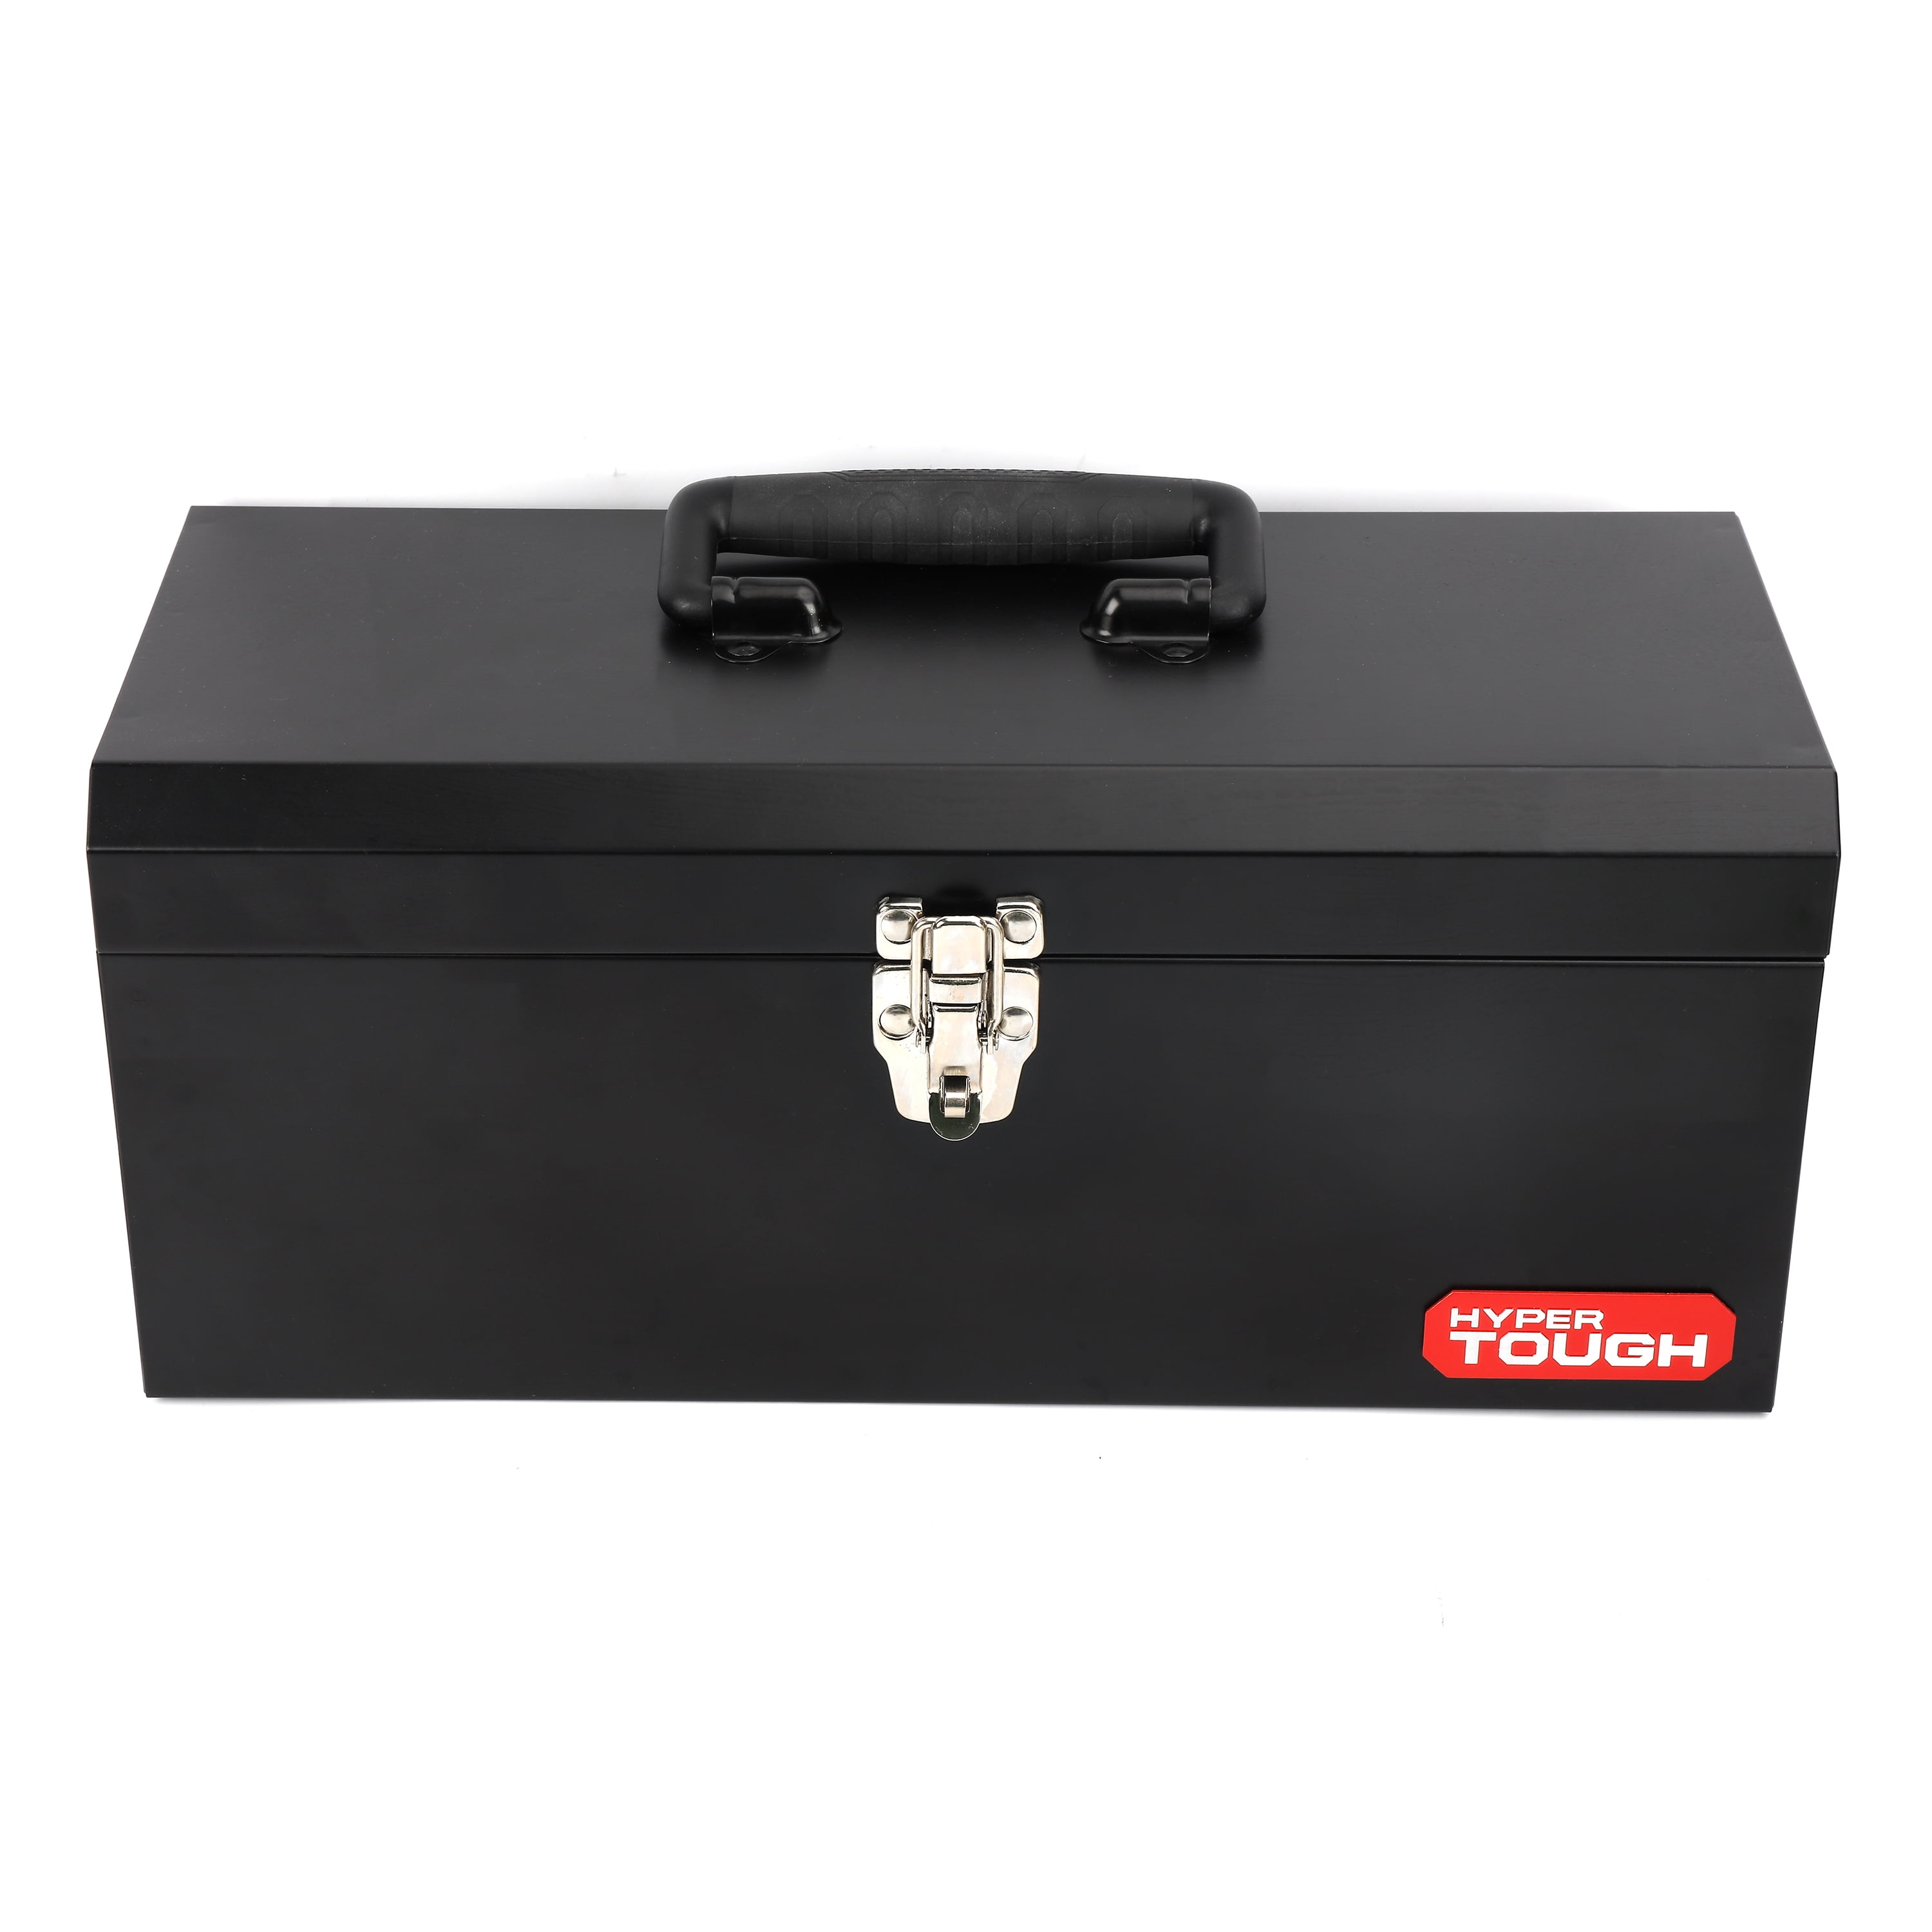 Hyper Tough Metal Toolbox with Removeable Tray - Black - 16 in